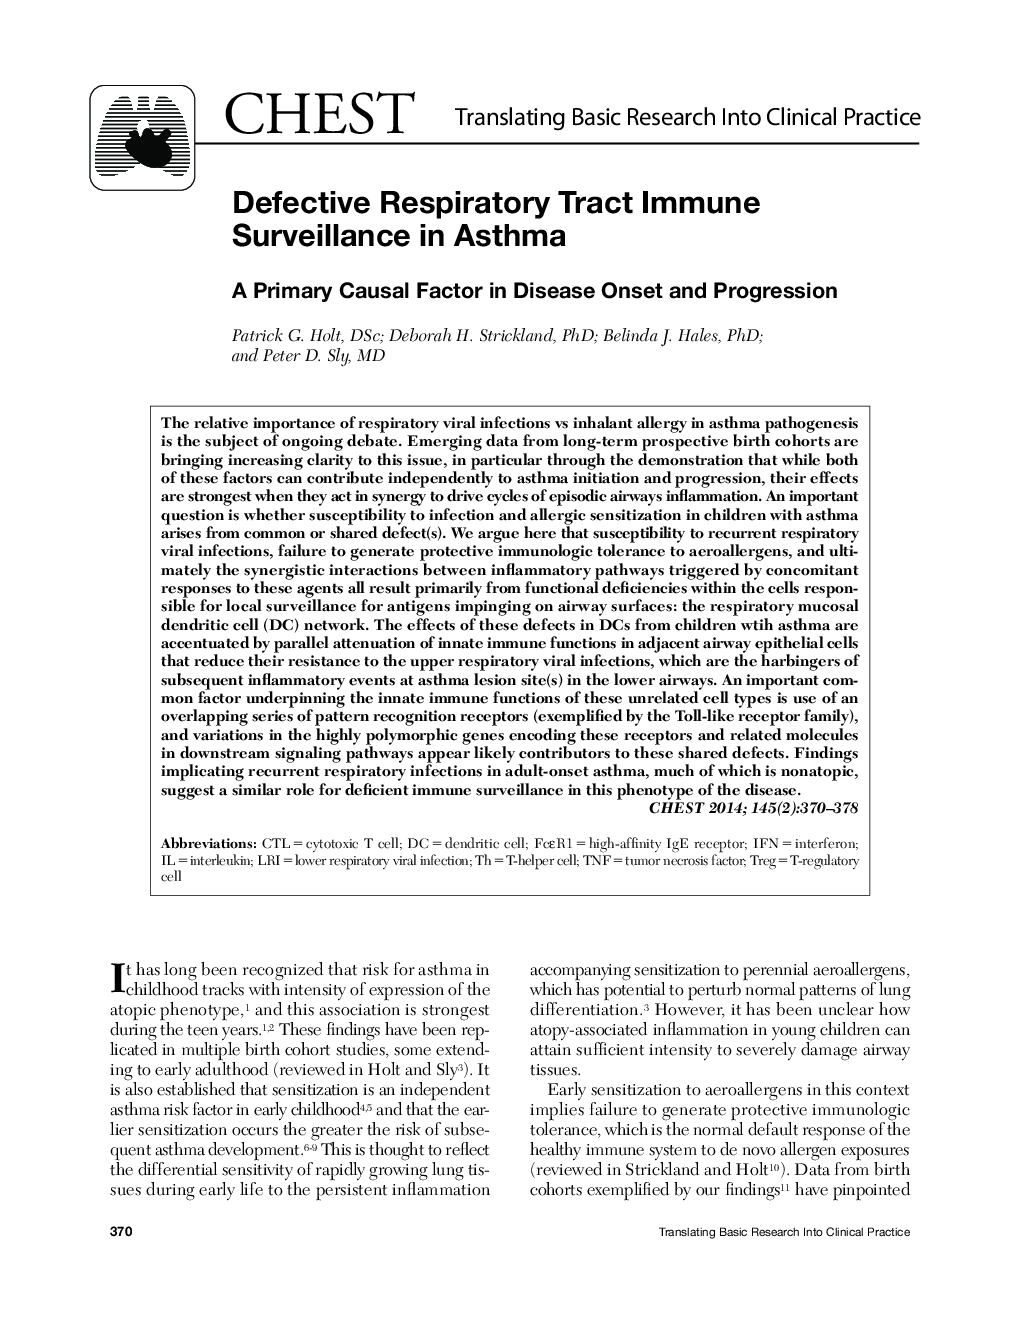 Defective Respiratory Tract Immune Surveillance in Asthma